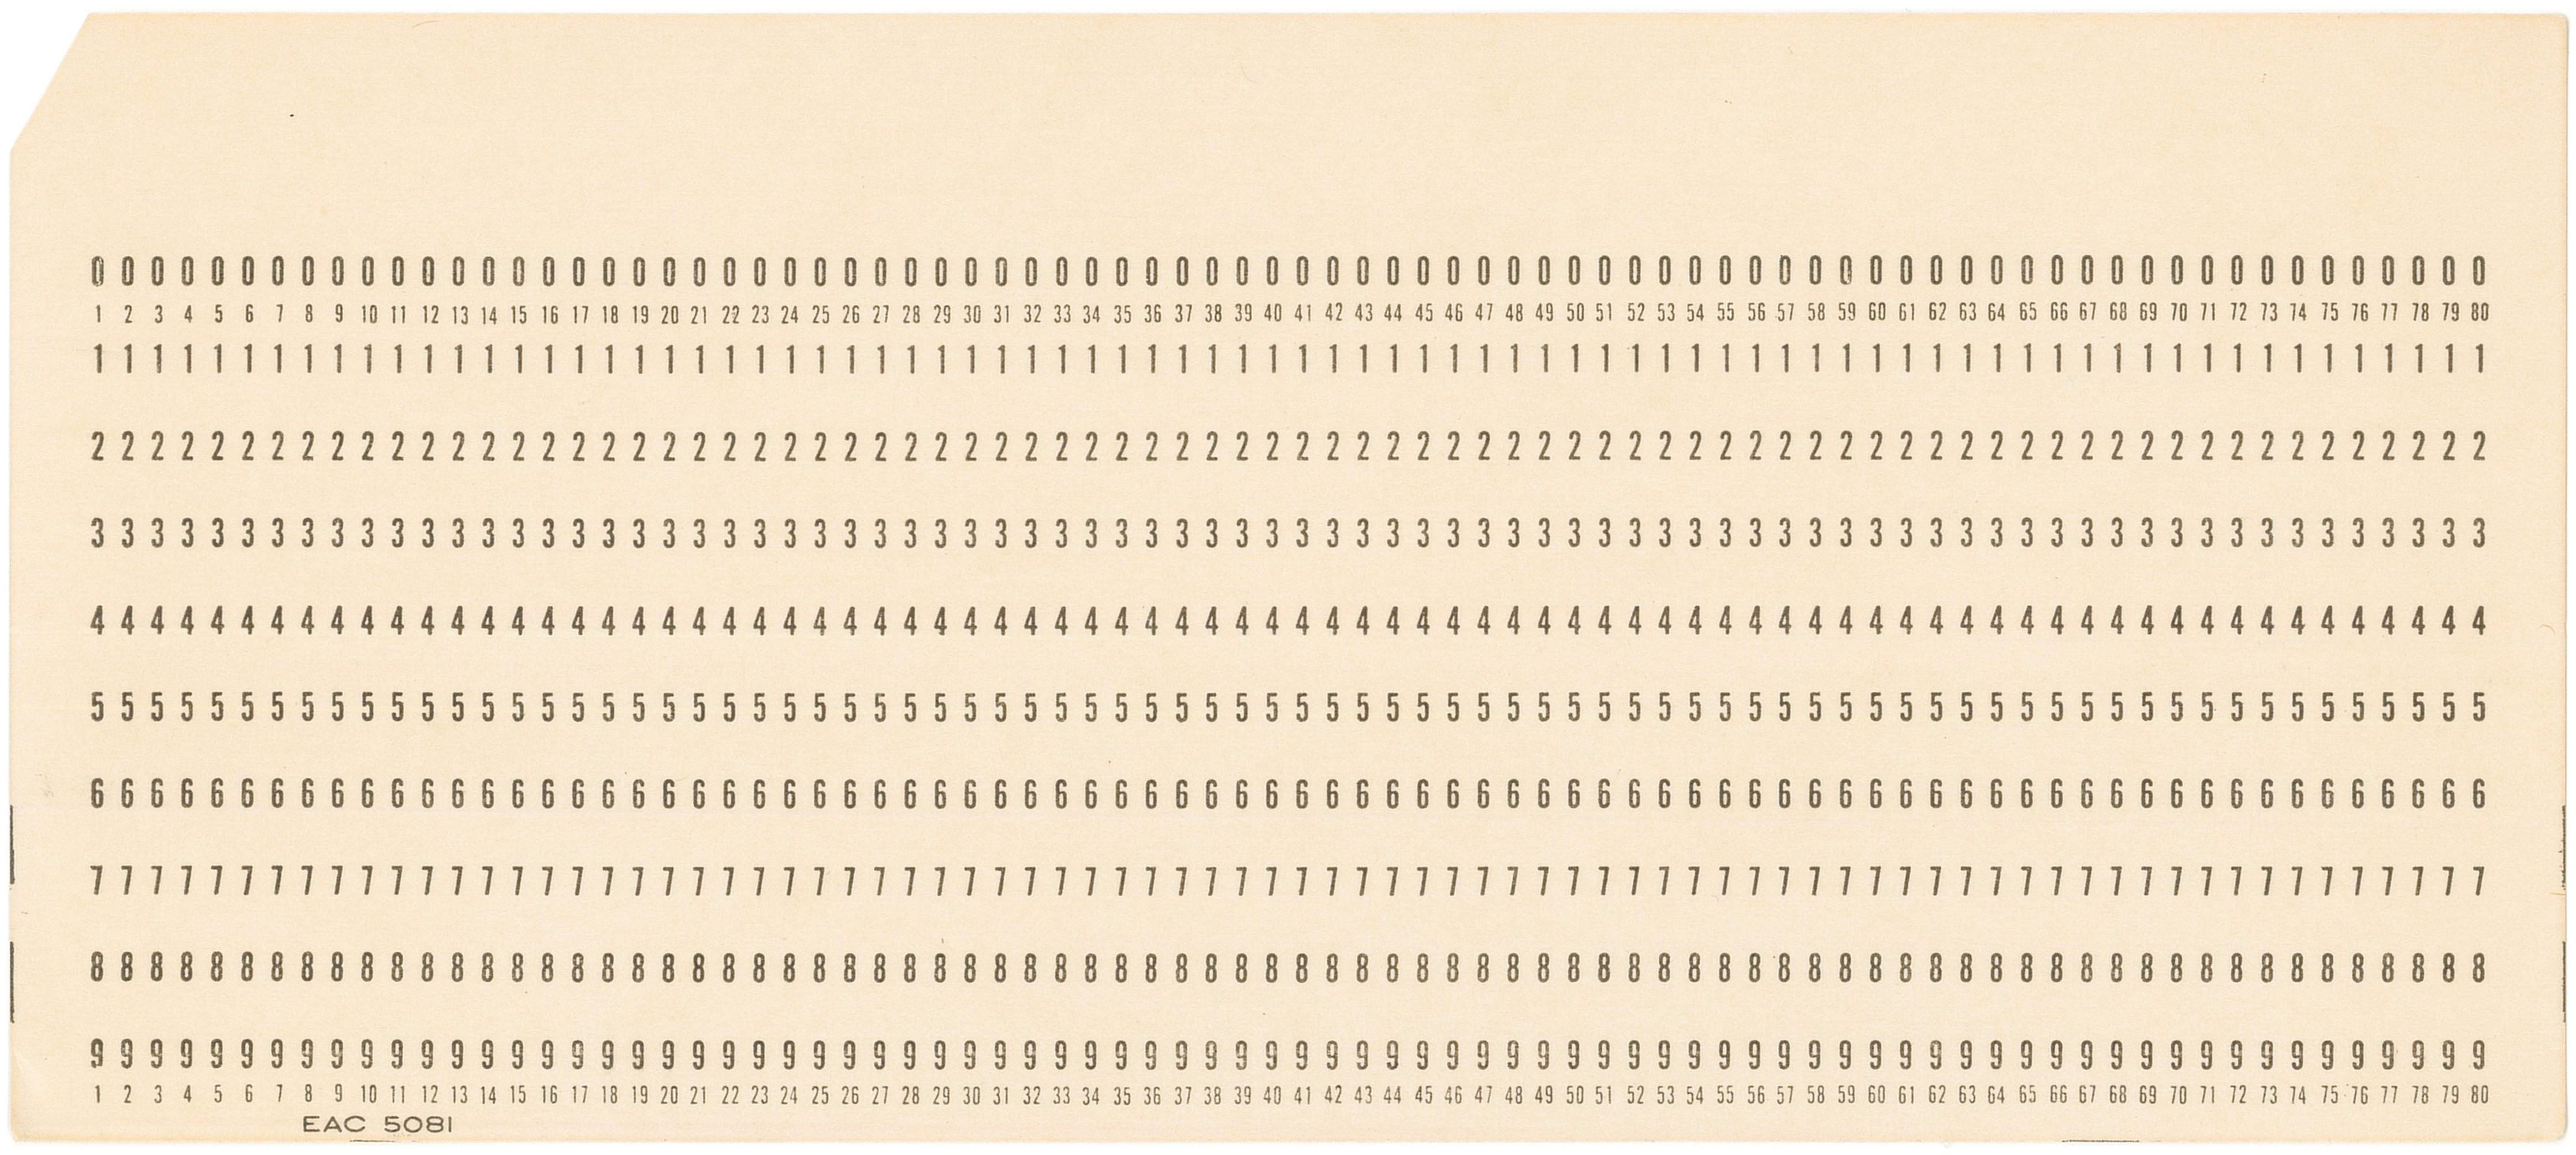 The punched card